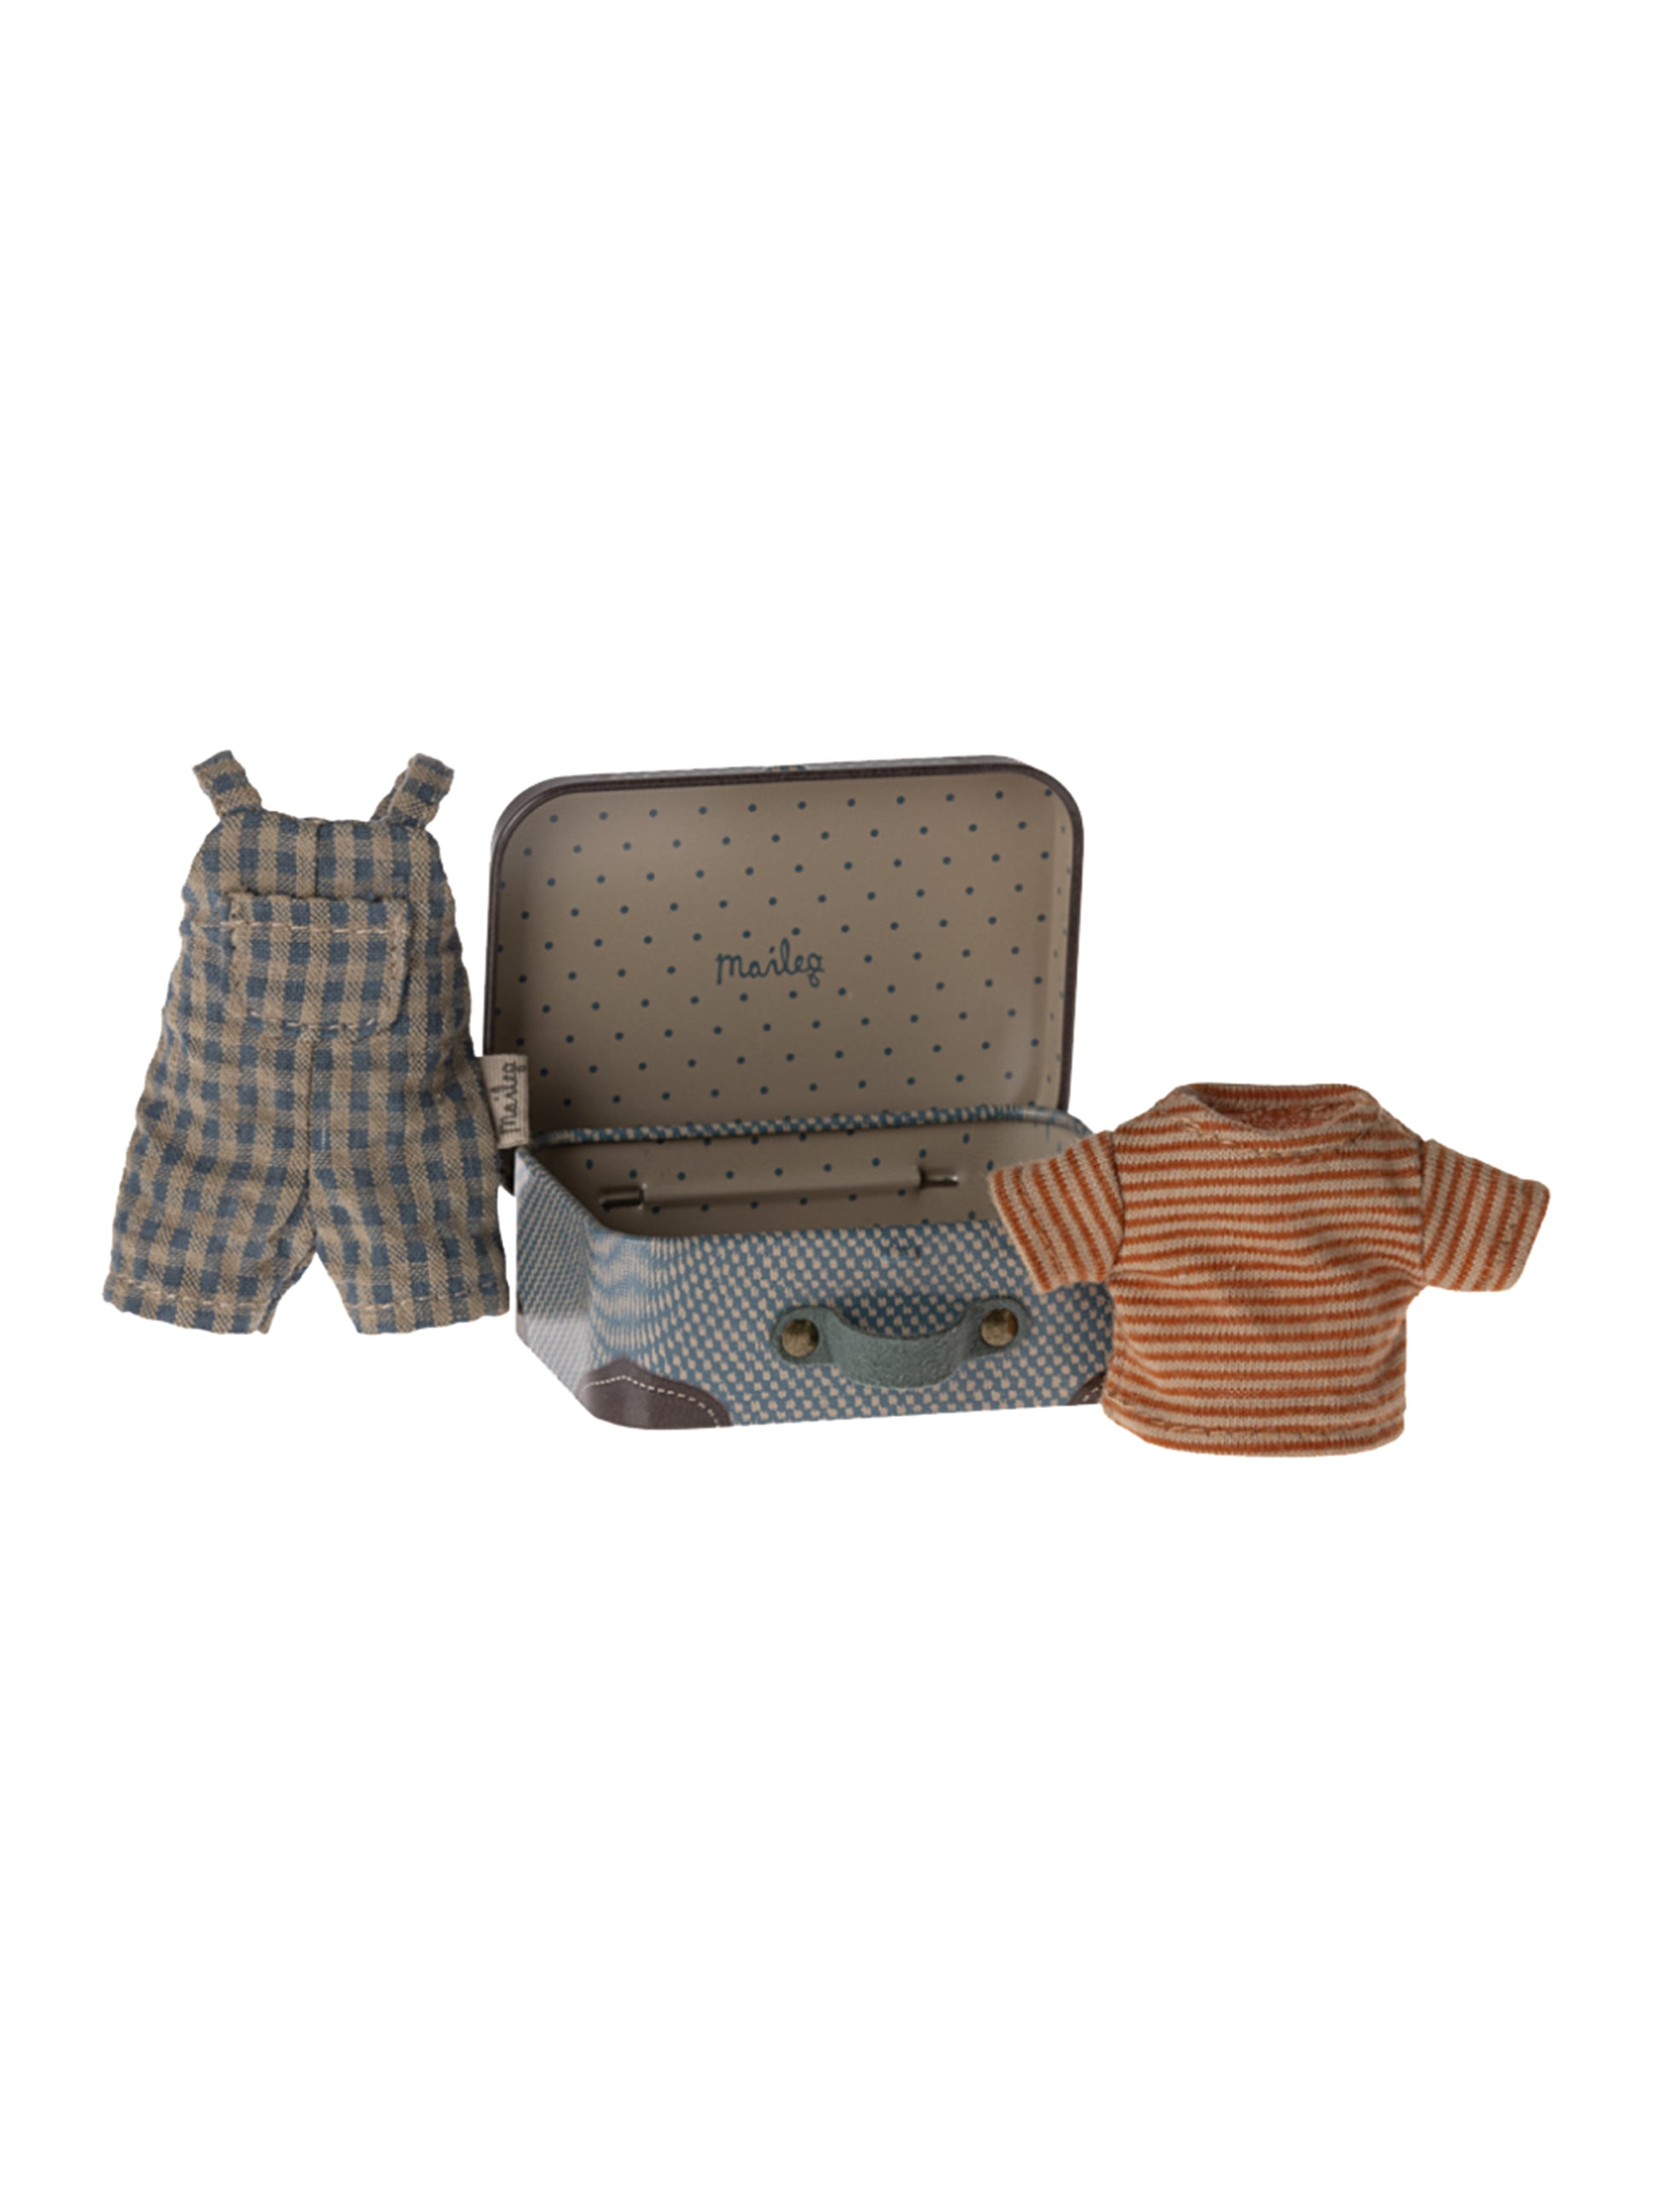 Maileg Big Brother Mouse Overalls and Shirt in Suitcase Weston Table